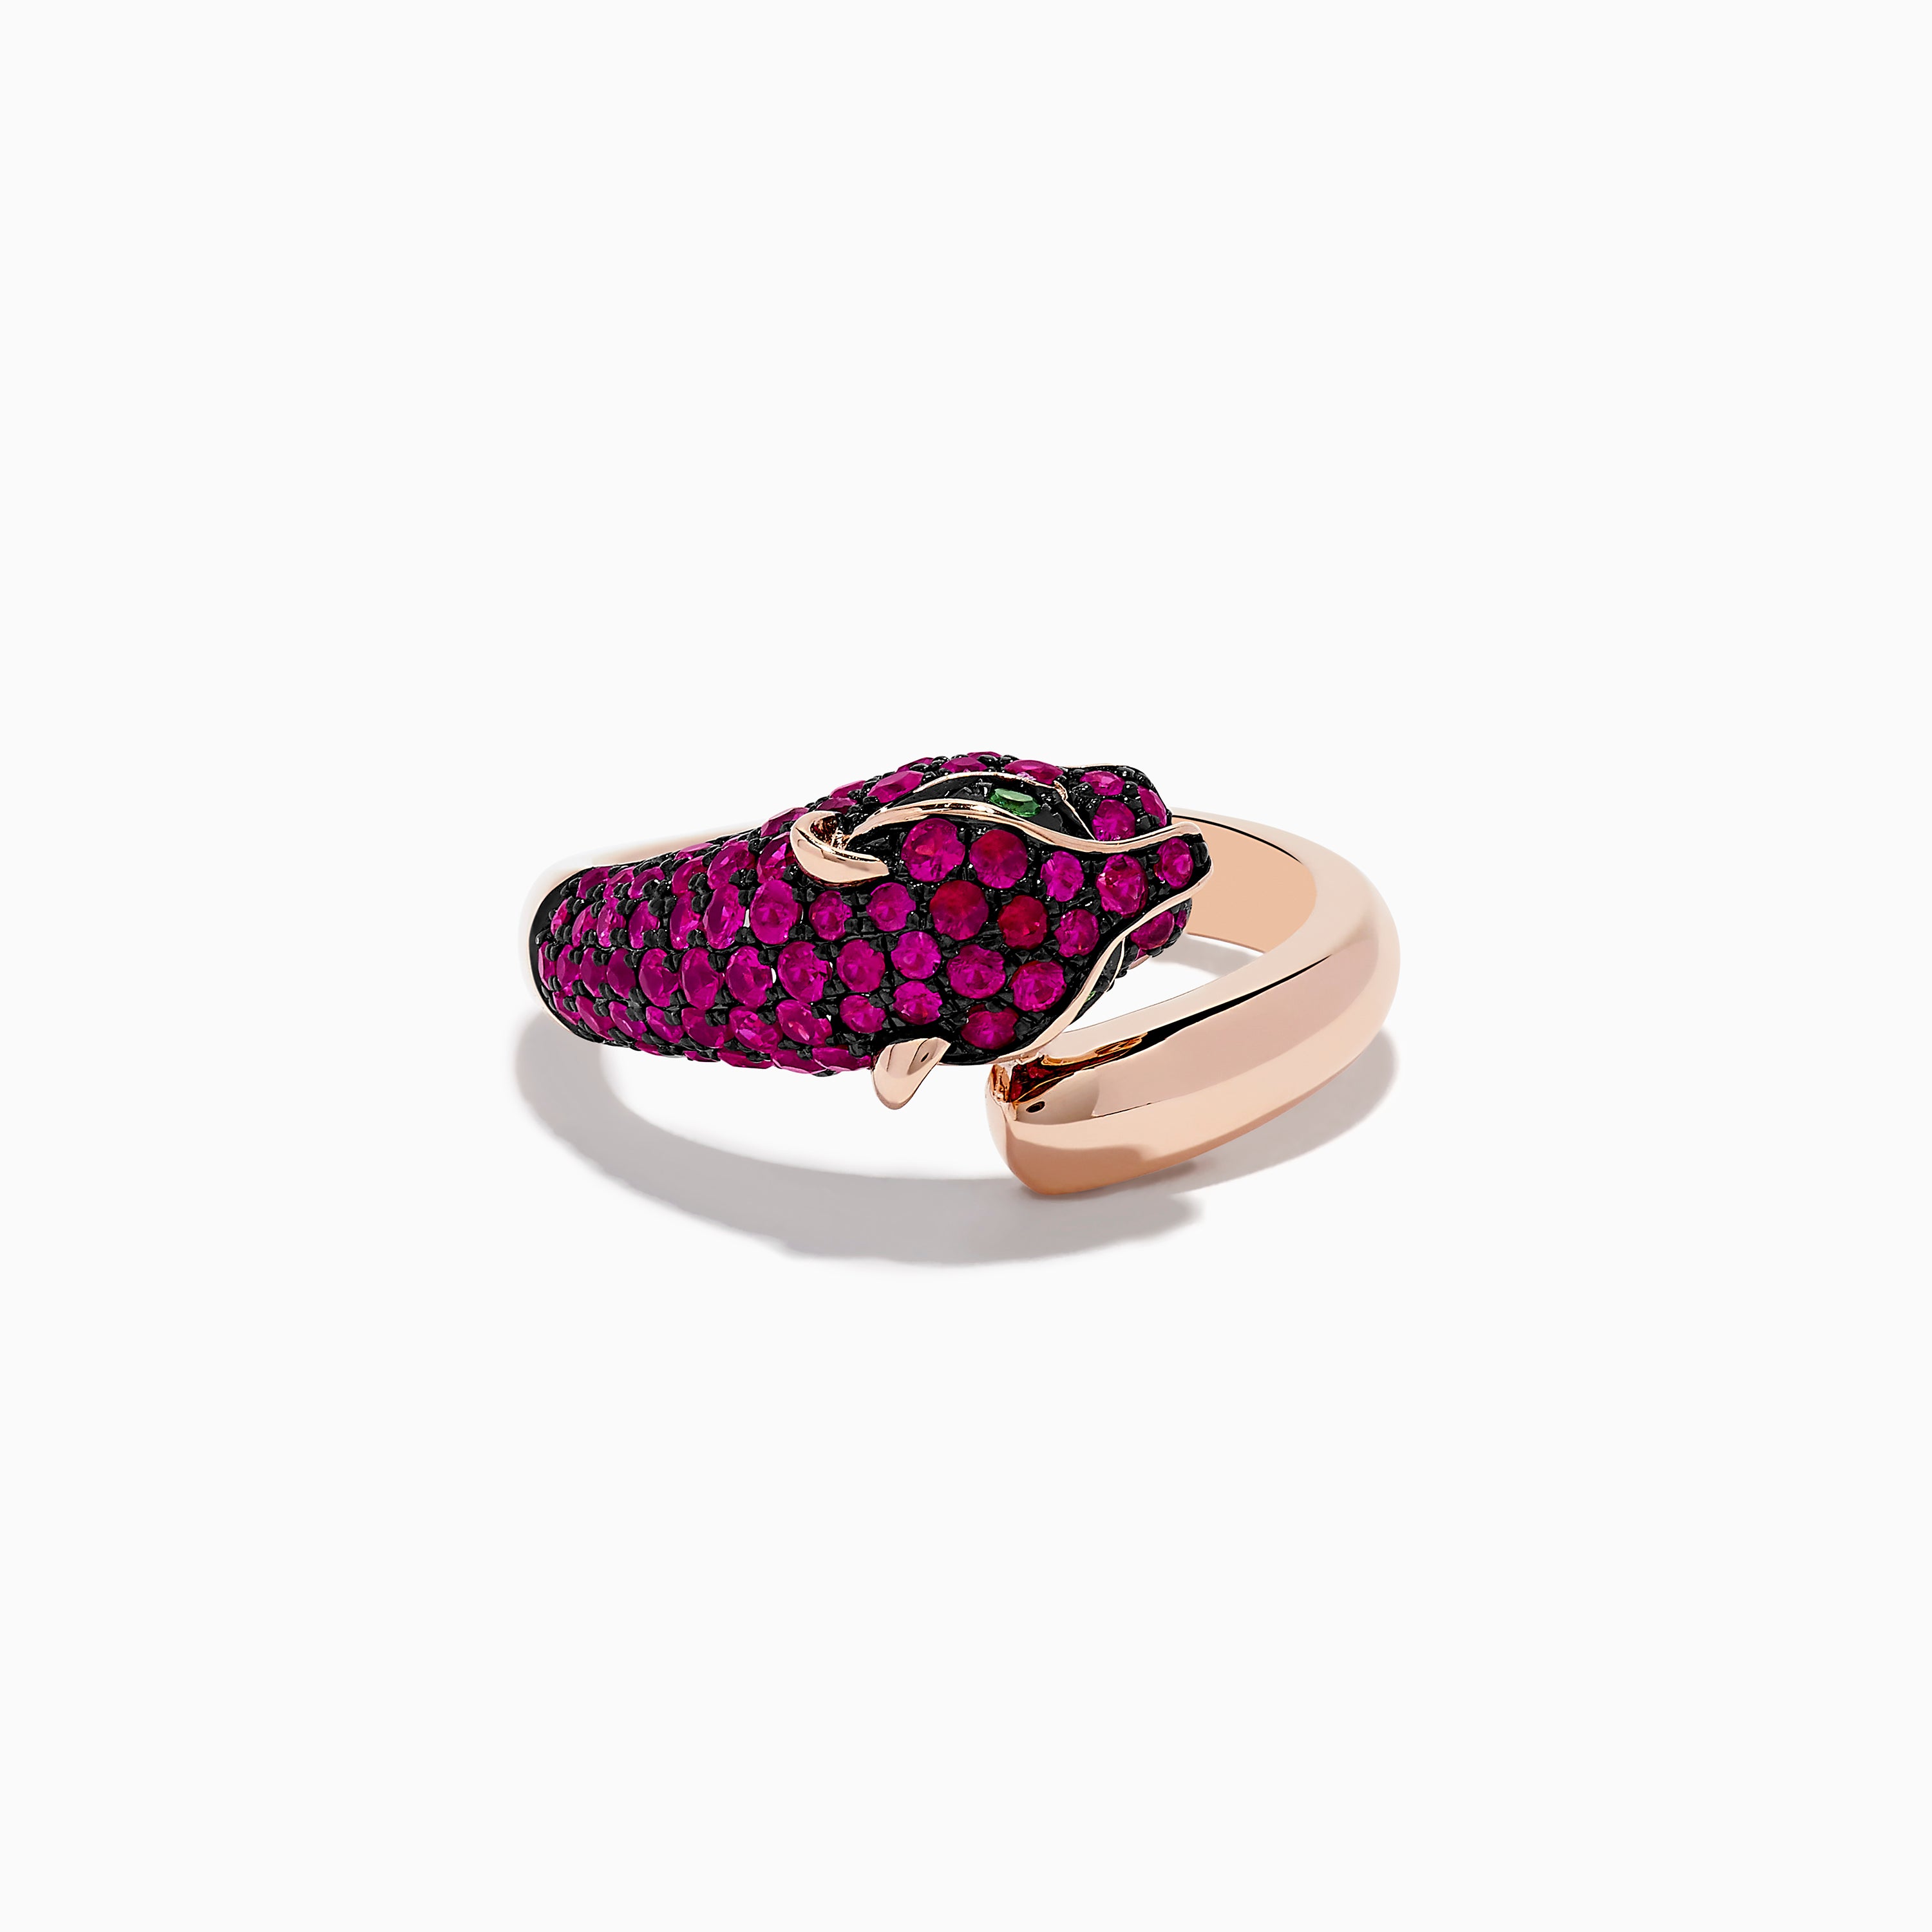 Effy Signature 14K Rose Gold Ruby and Tsavorite Panther Ring